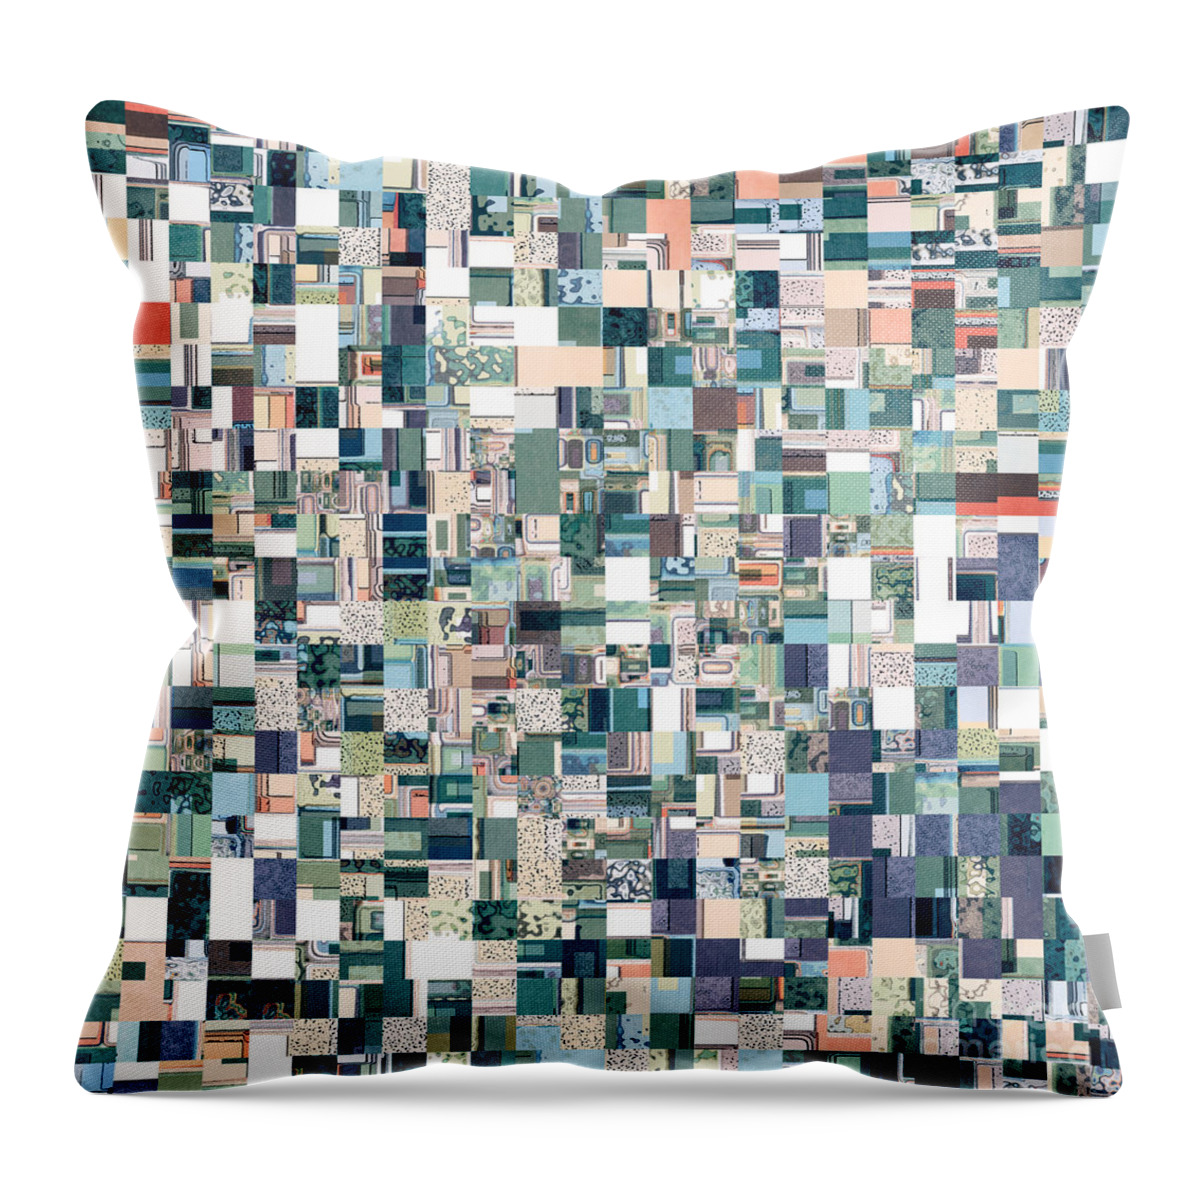 Abstract Throw Pillow featuring the digital art Jumbled Geometric Abstract by Phil Perkins